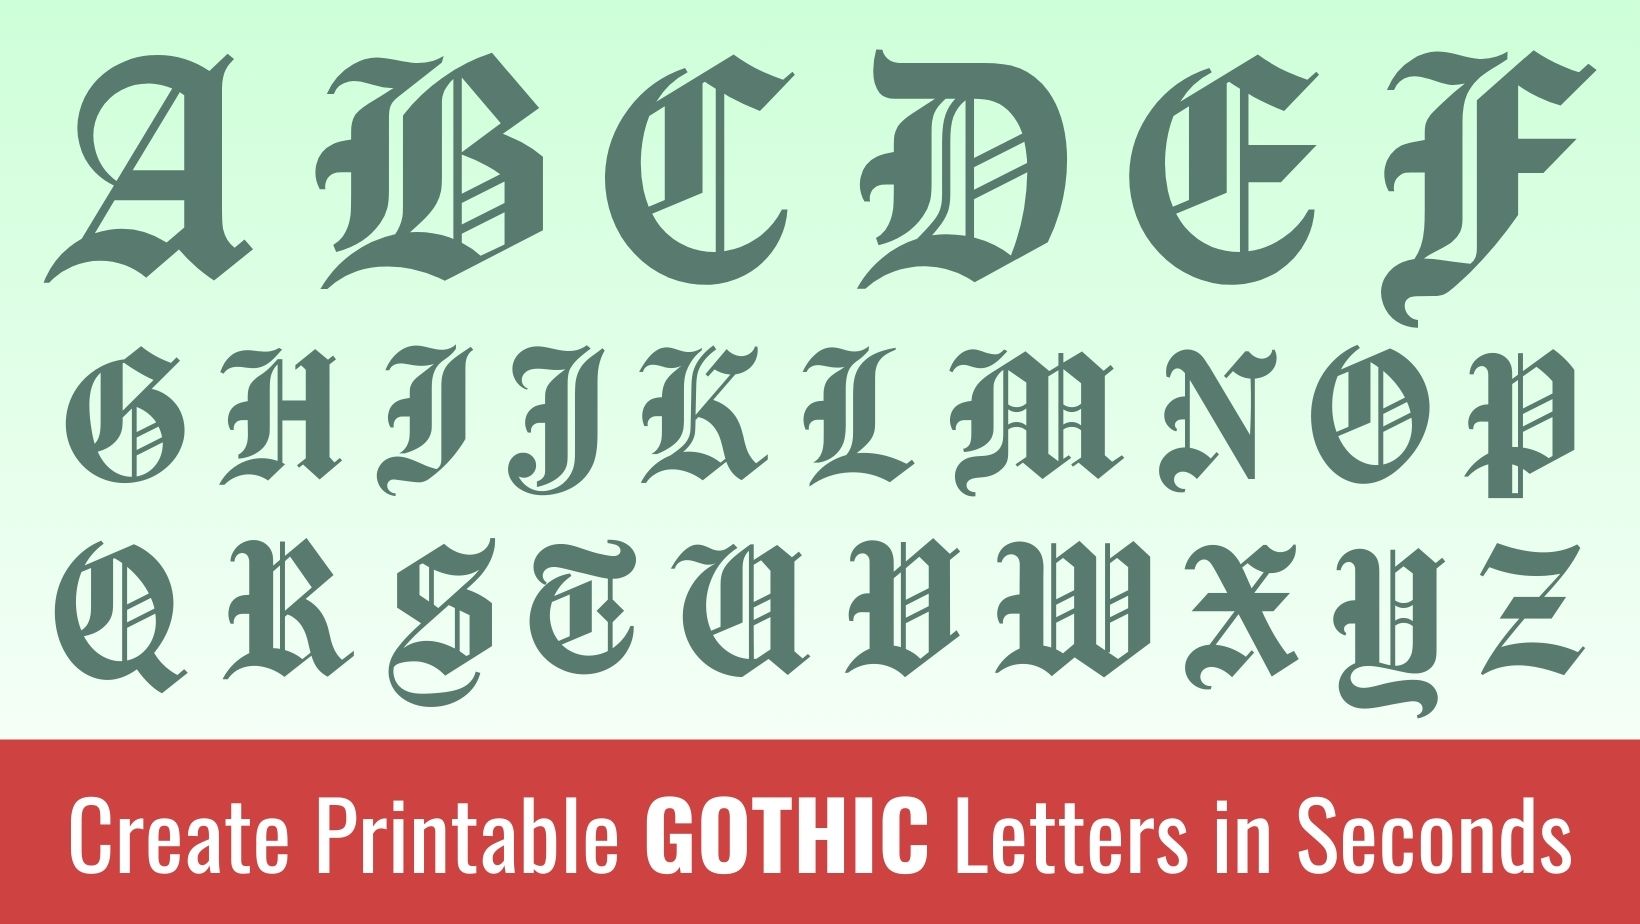 Printable gothic Letters: Free Alphabet Font and Letter Templates